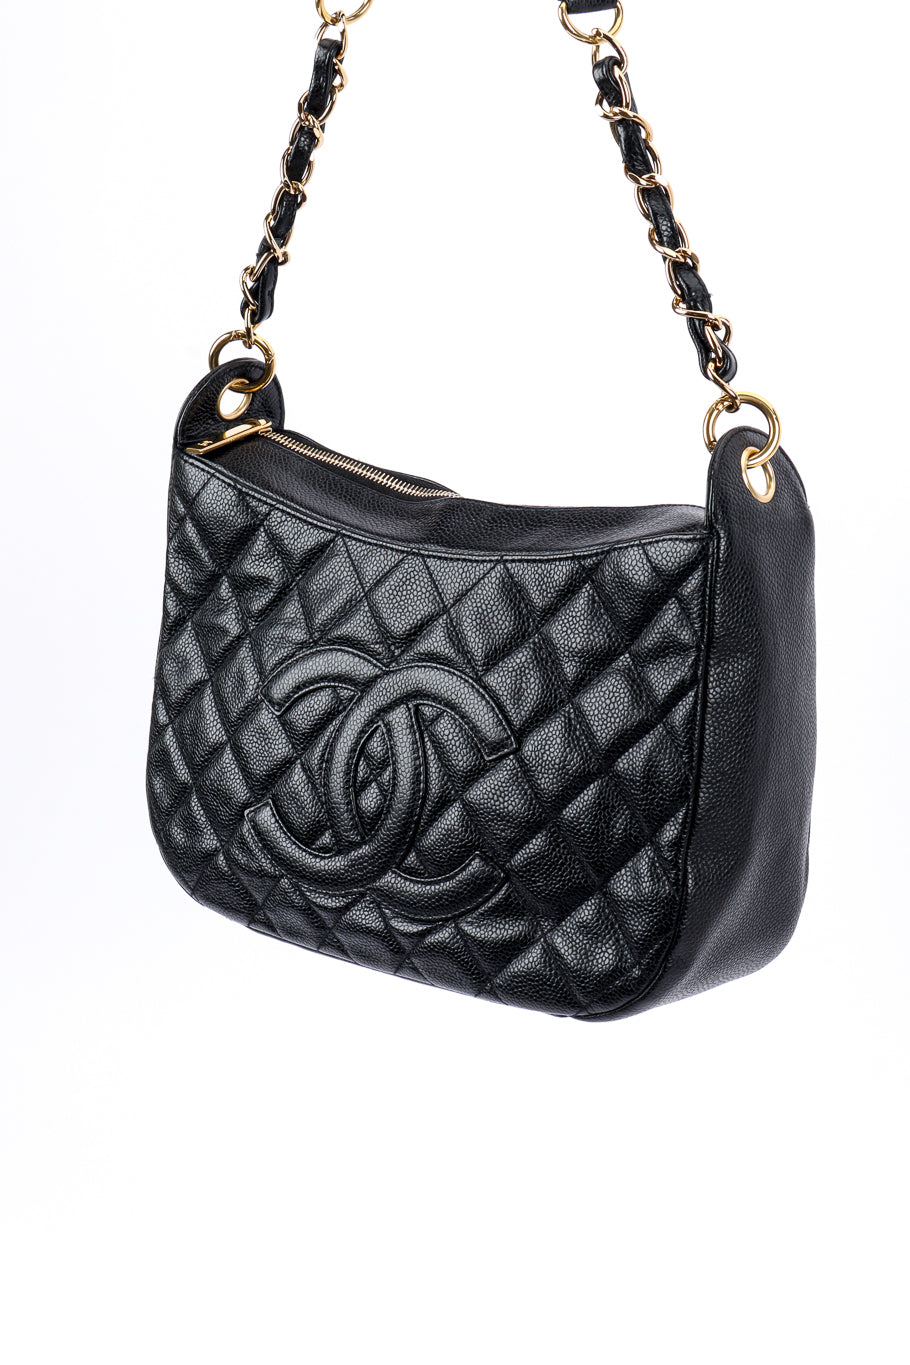 Chanel Quilted CC Shoulder Bag 3/4 front suspended by strap @recess la